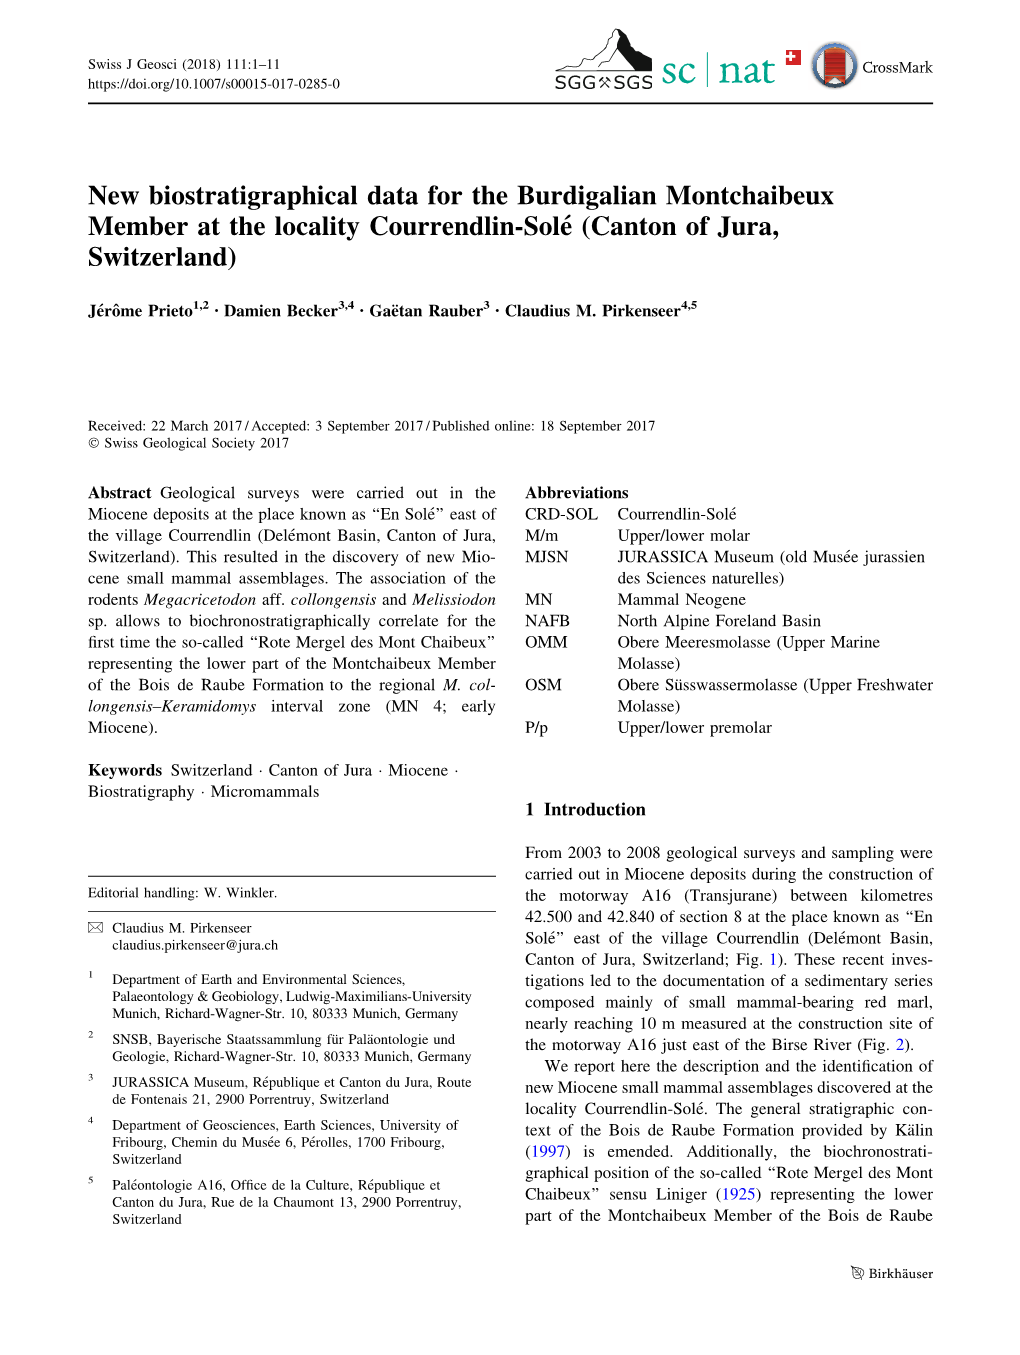 New Biostratigraphical Data for the Burdigalian Montchaibeux Member at the Locality Courrendlin-Solé (Canton of Jura, Switzerla